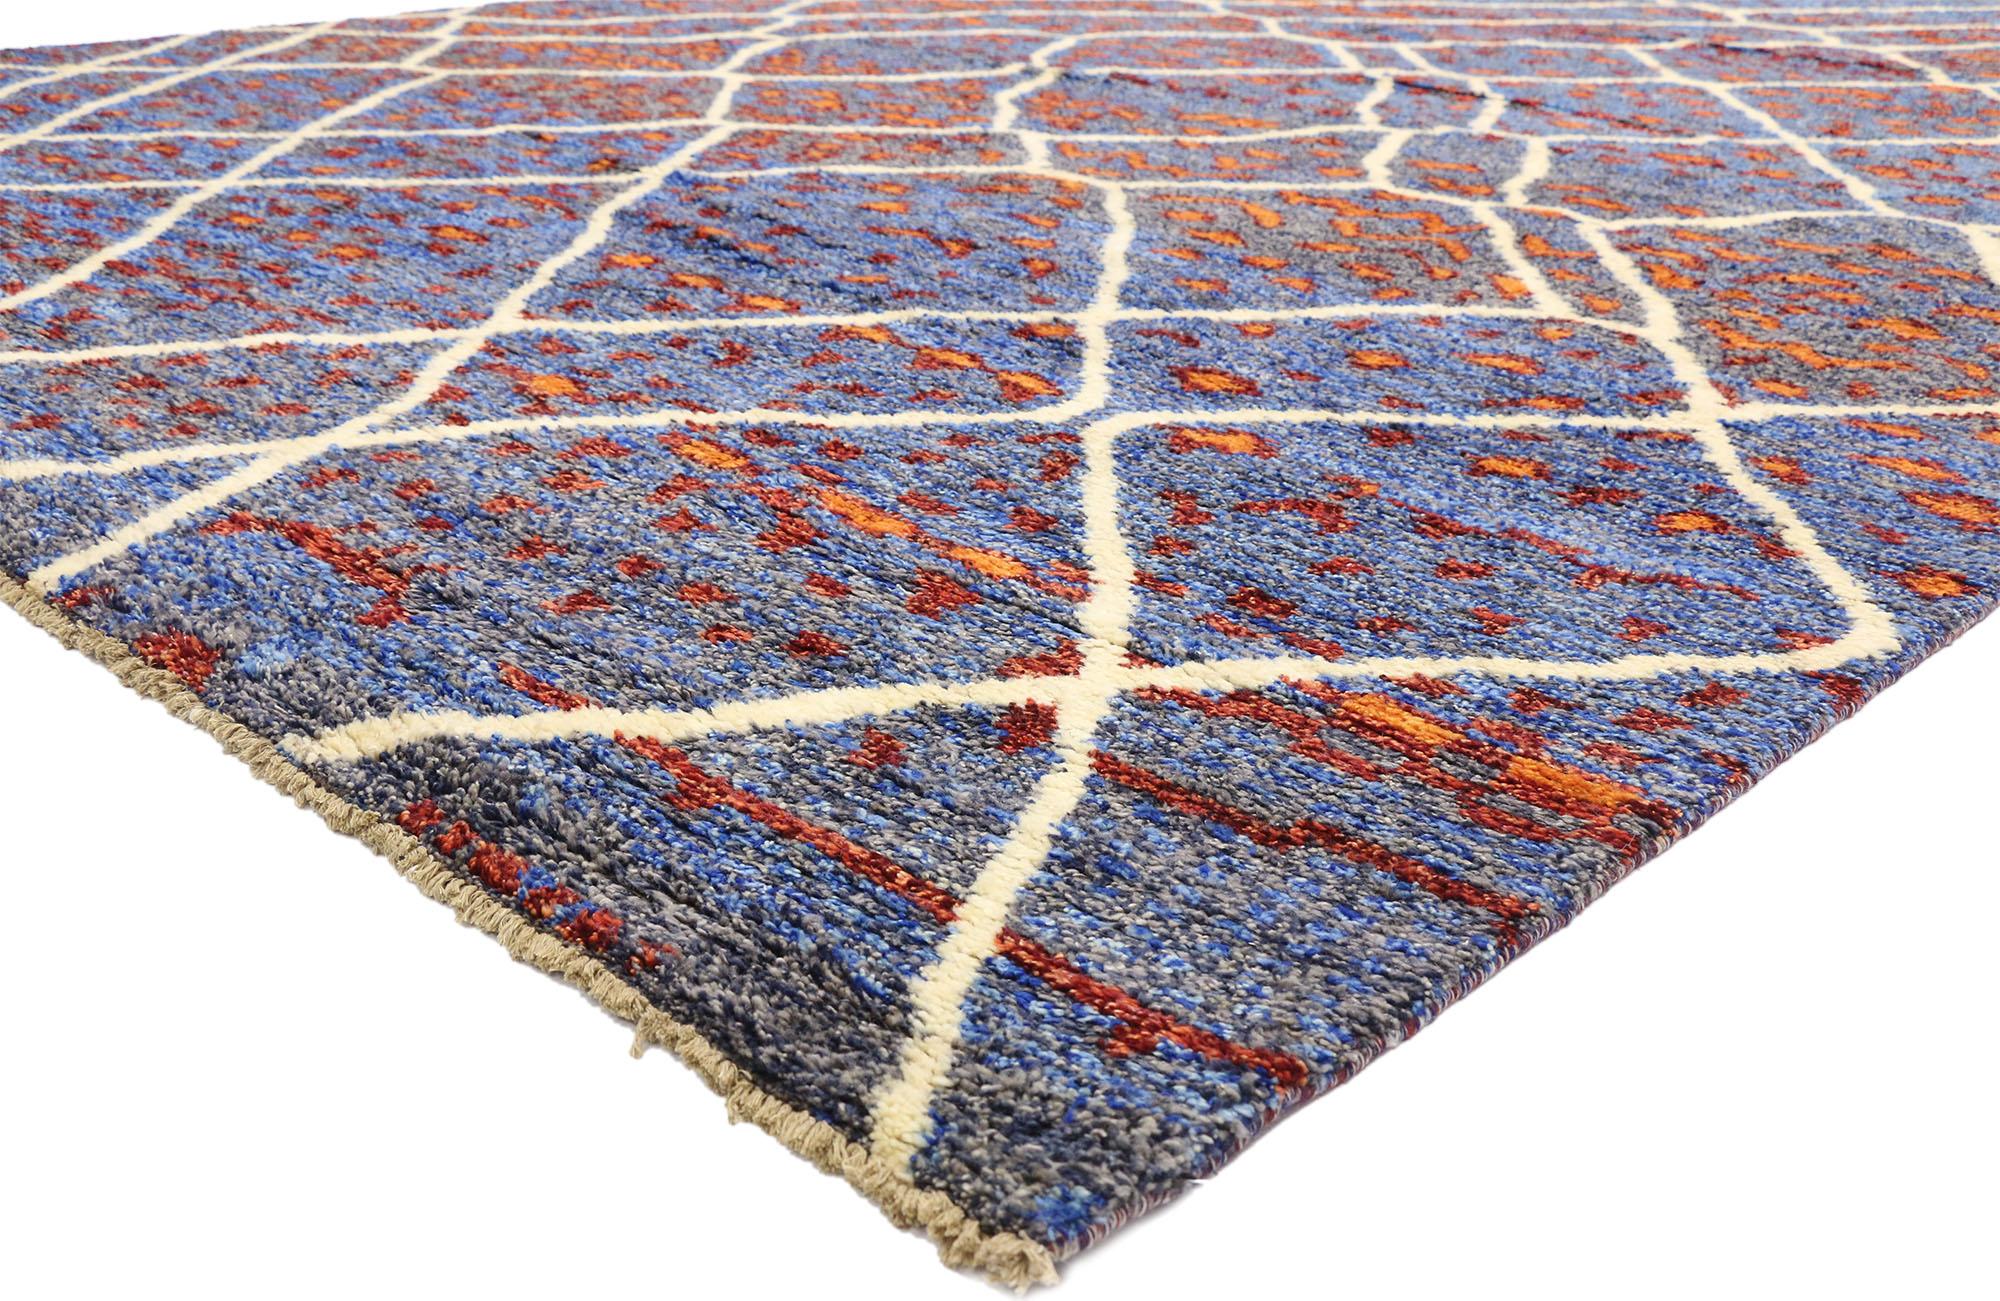 80484 Large Abstract Moroccan Rug, 10'06 x 13'09.
Nomadic charm collides with Abstract Expressionism in this hand knotted wool large Moroccan rug. The abstract design and energetic colors woven into this piece work together creating a bold, exotic